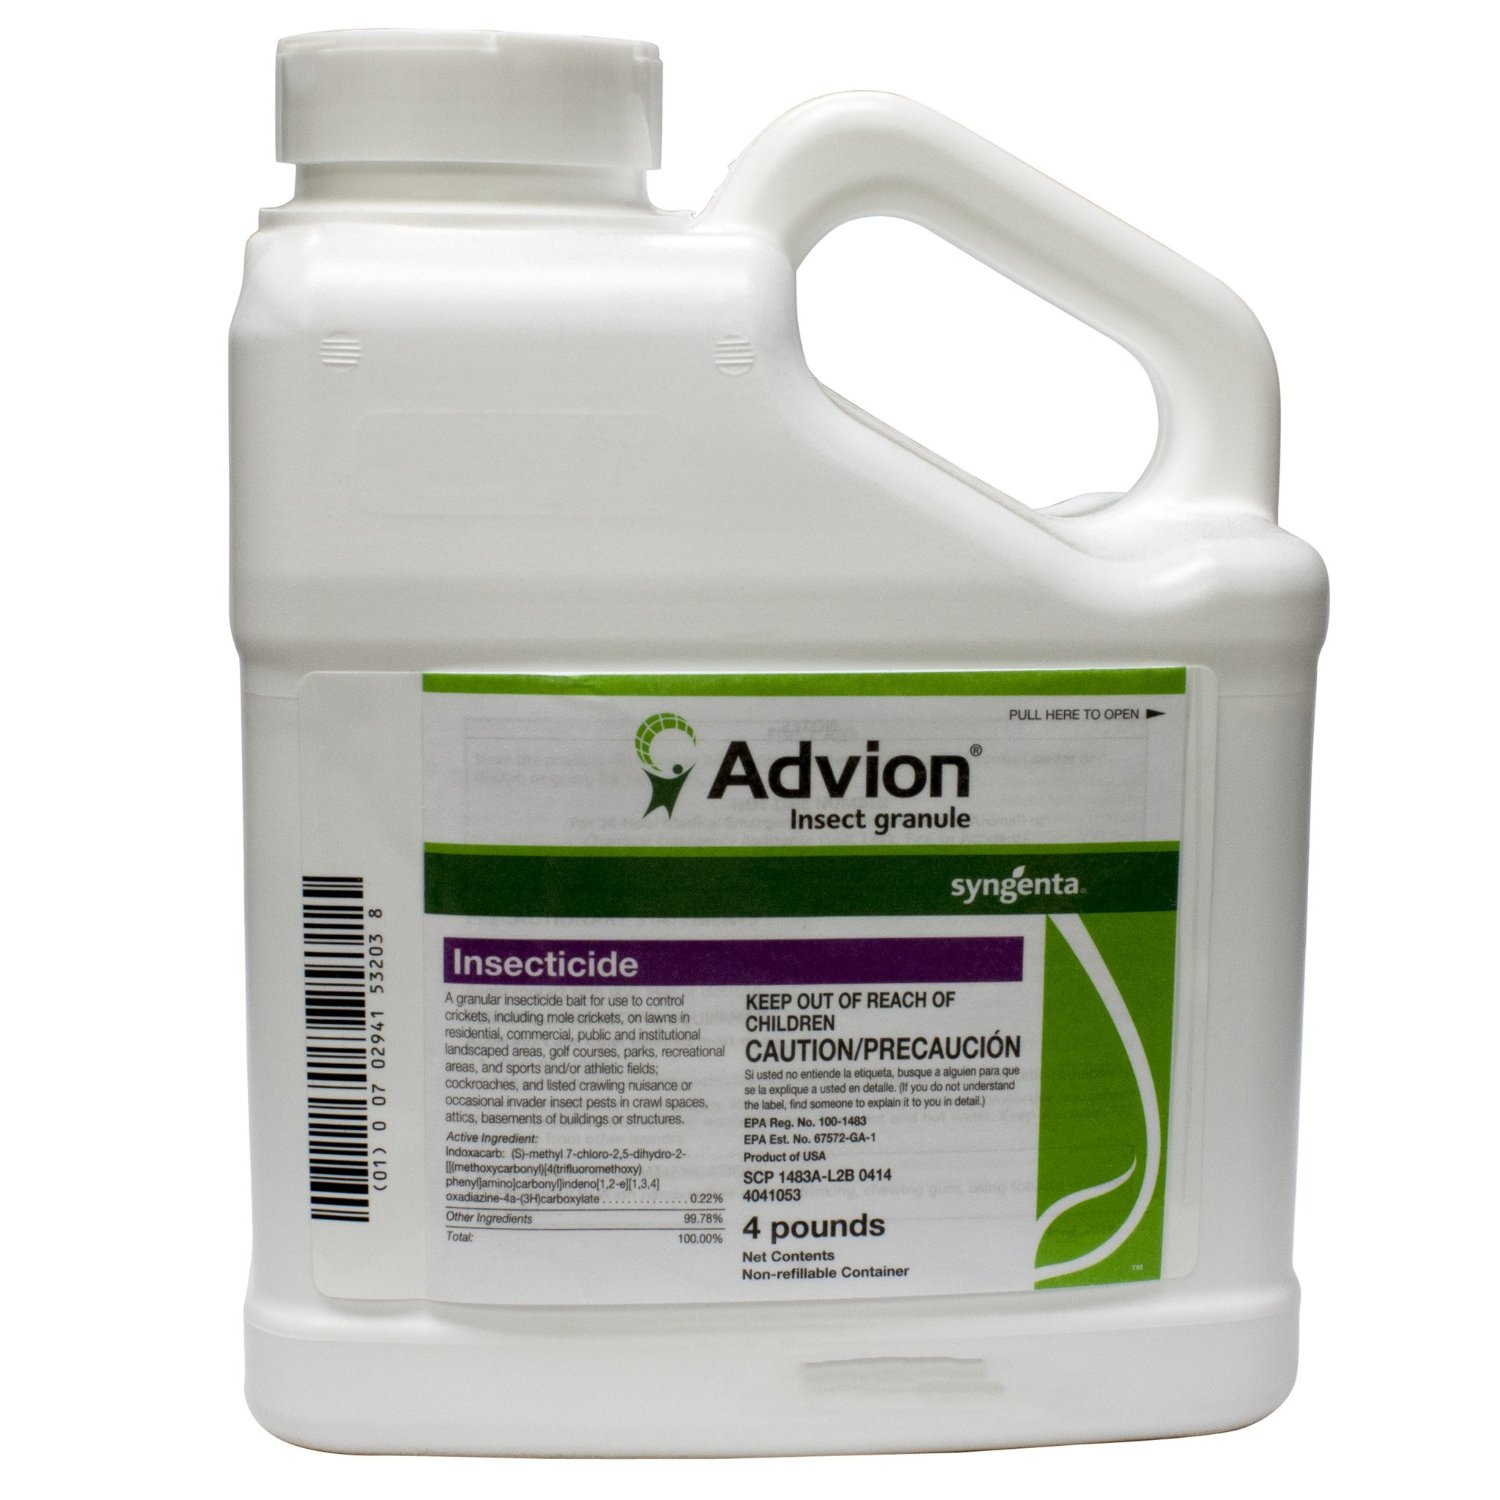 Advion Insect Granule - 4 lbs (Discontinued)